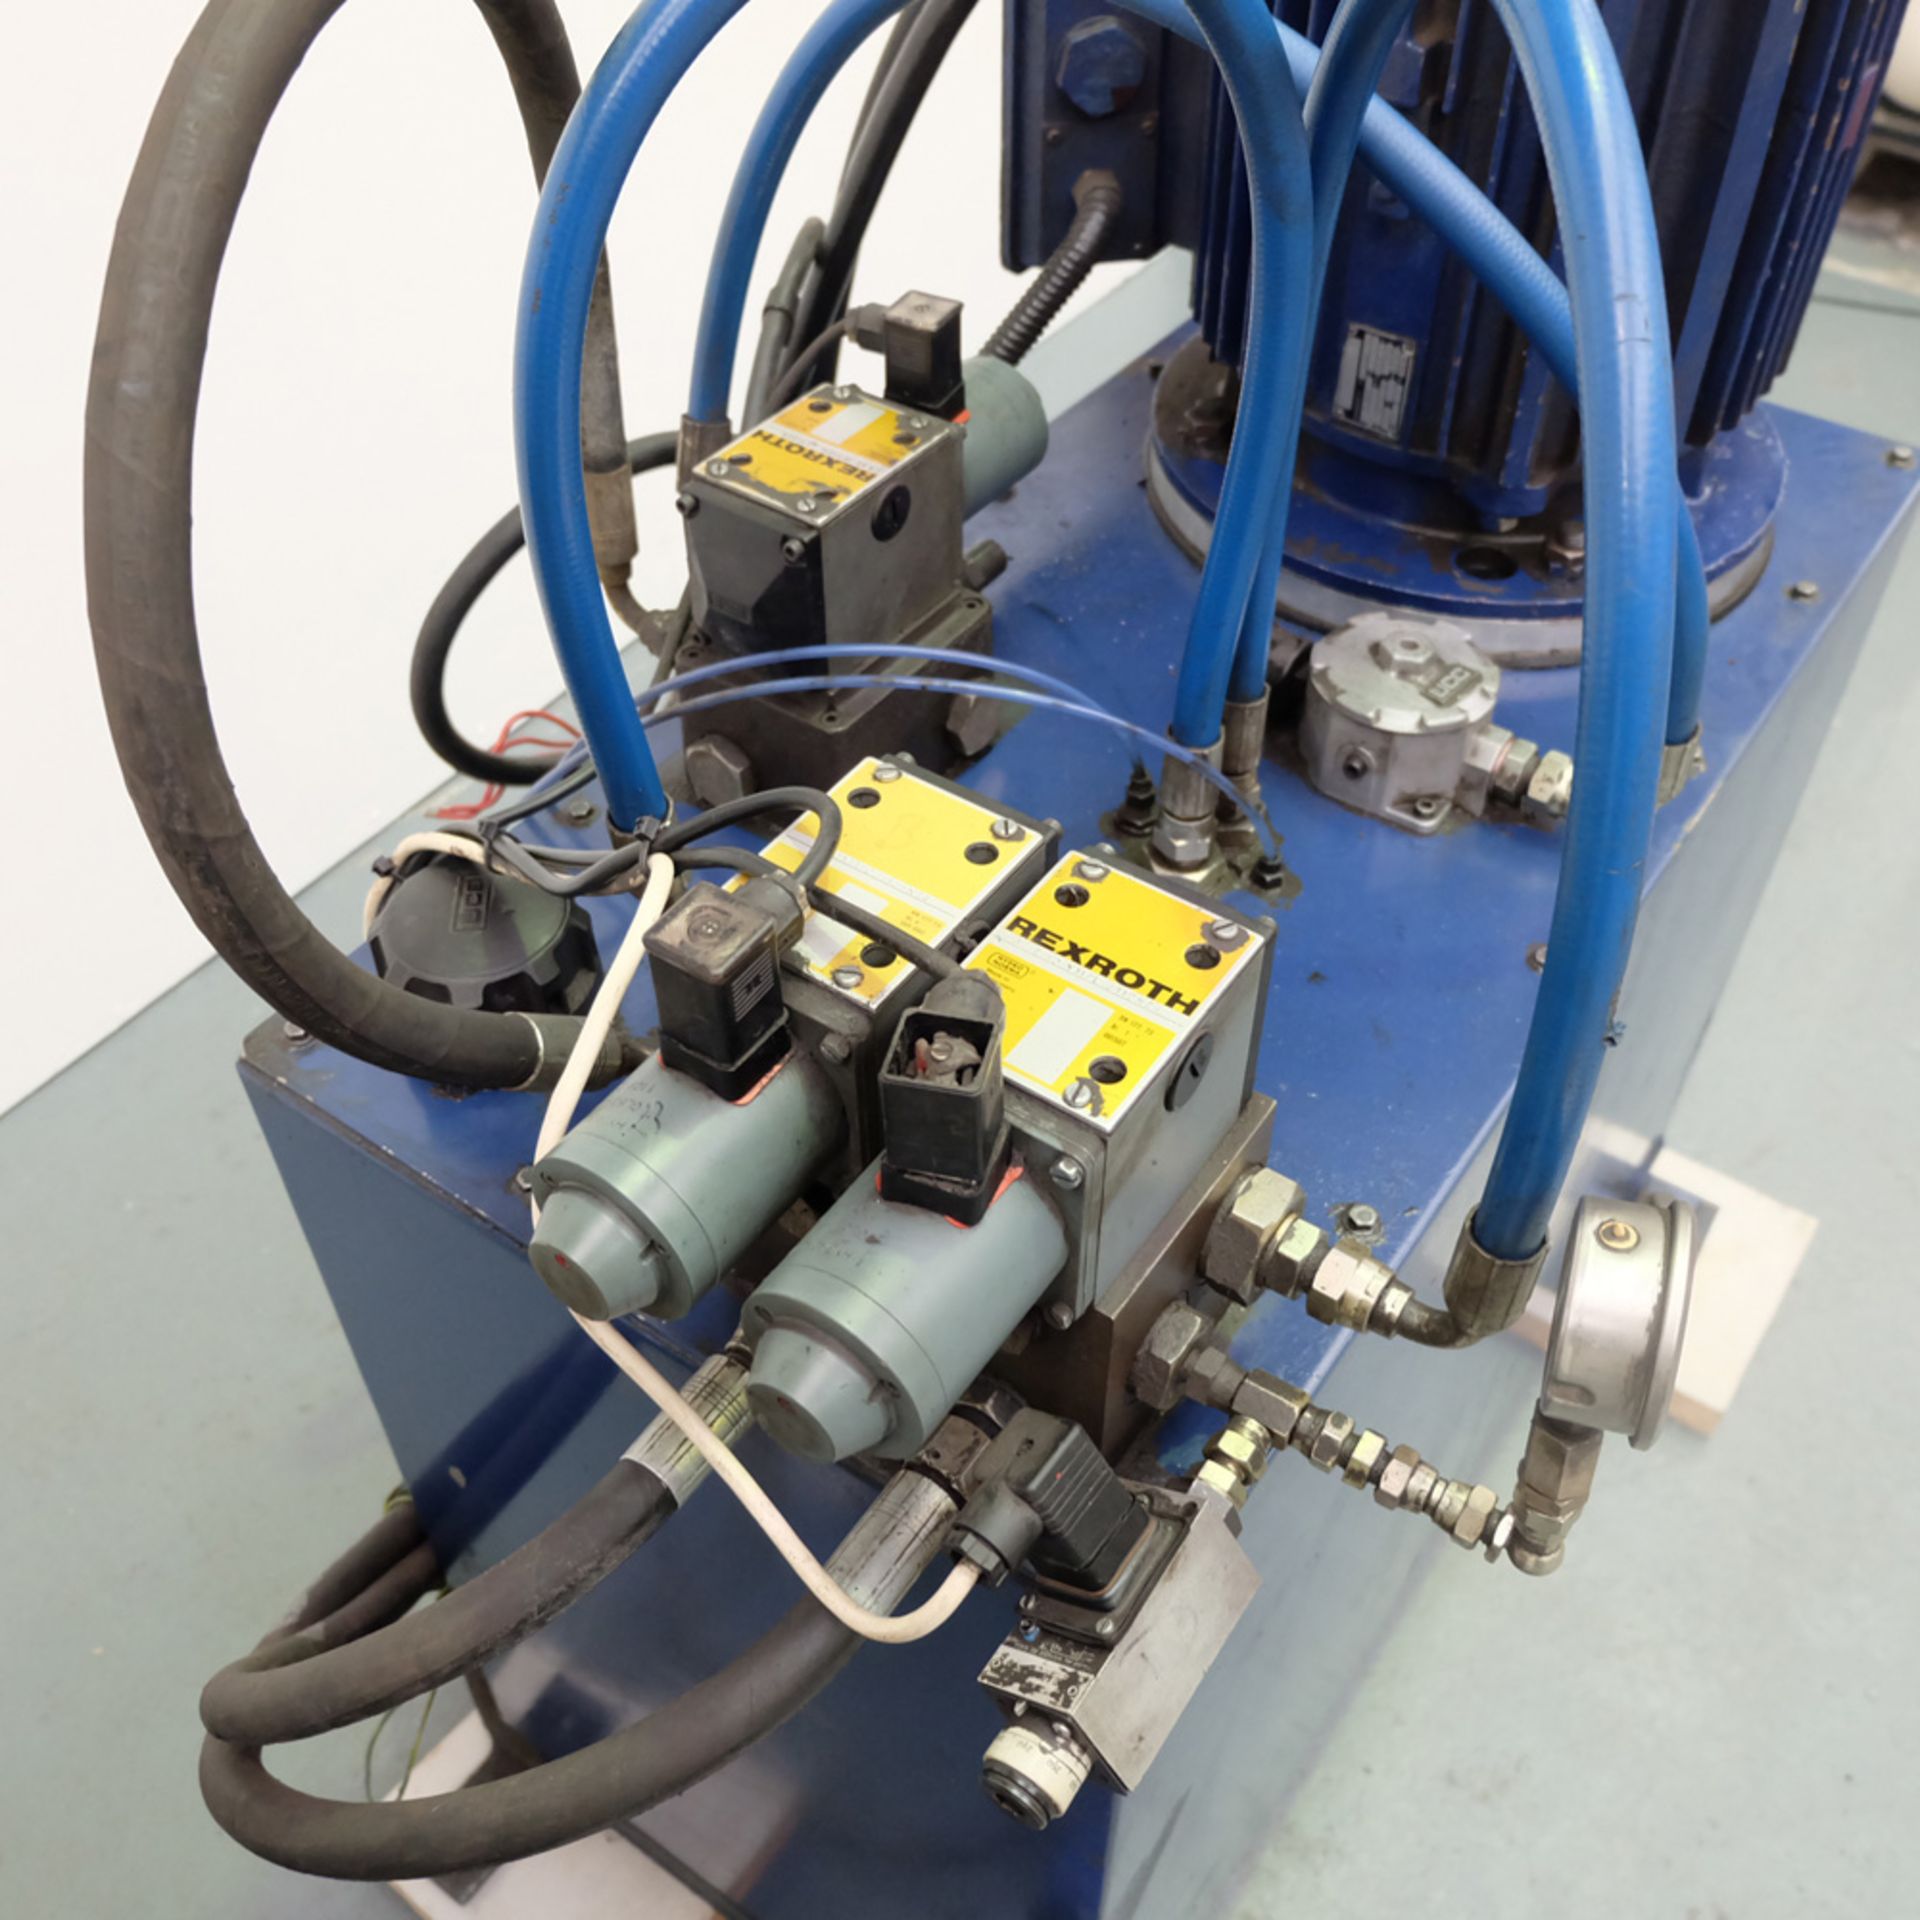 Hydraulic Powered 5 Head Punching Station. On Tee Slotted Table. - Image 11 of 13